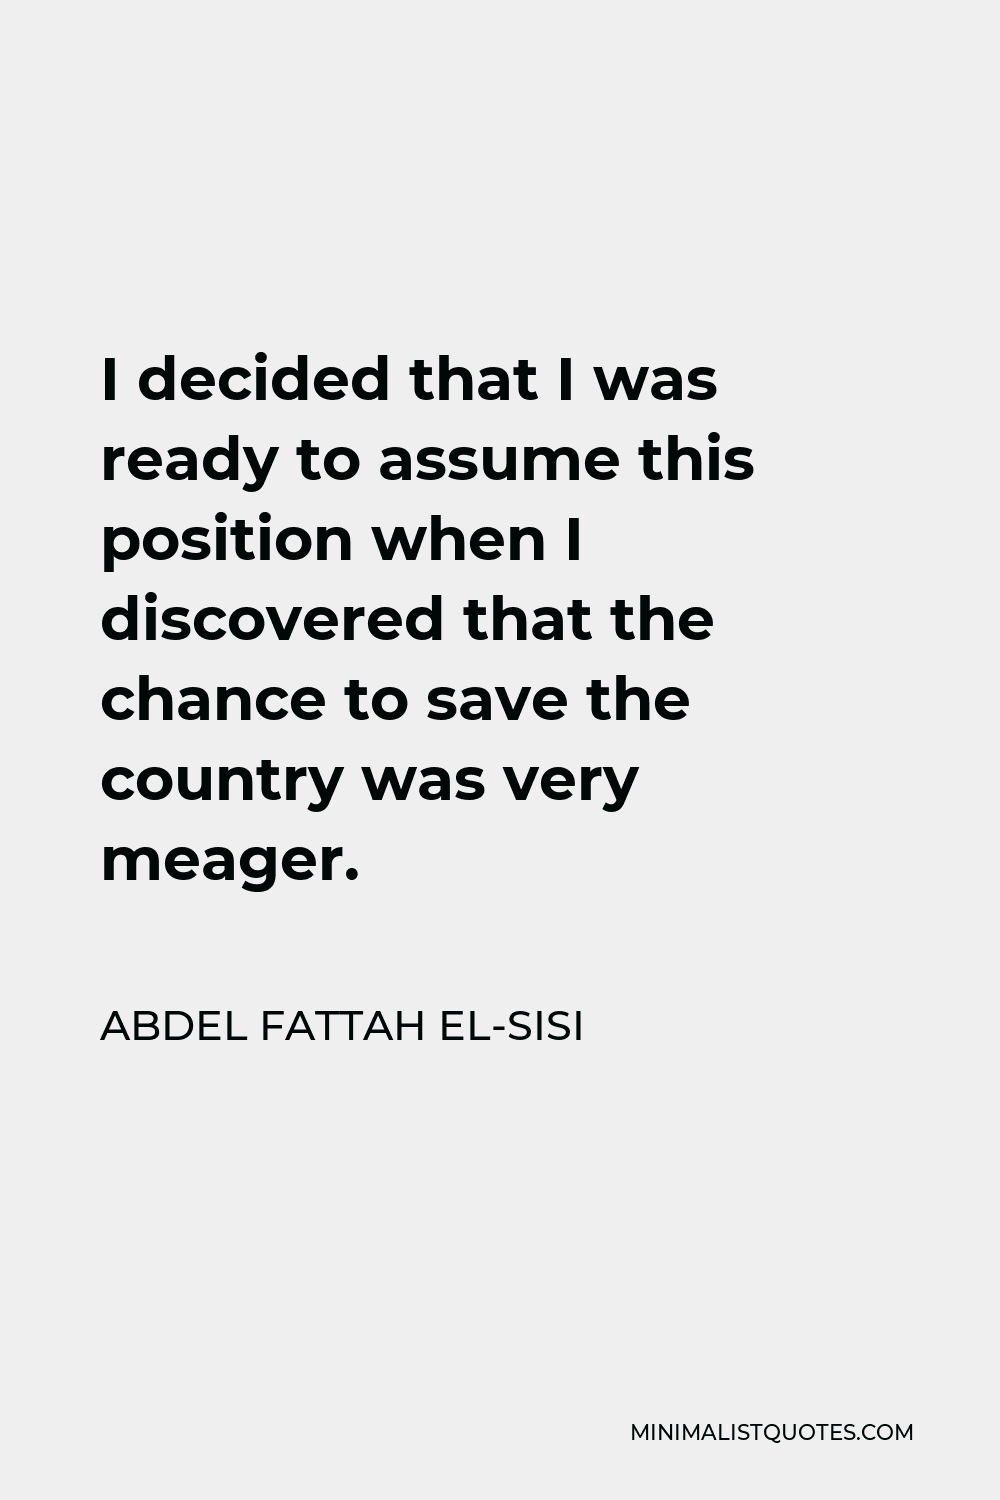 Abdel Fattah el-Sisi Quote - I decided that I was ready to assume this position when I discovered that the chance to save the country was very meager.